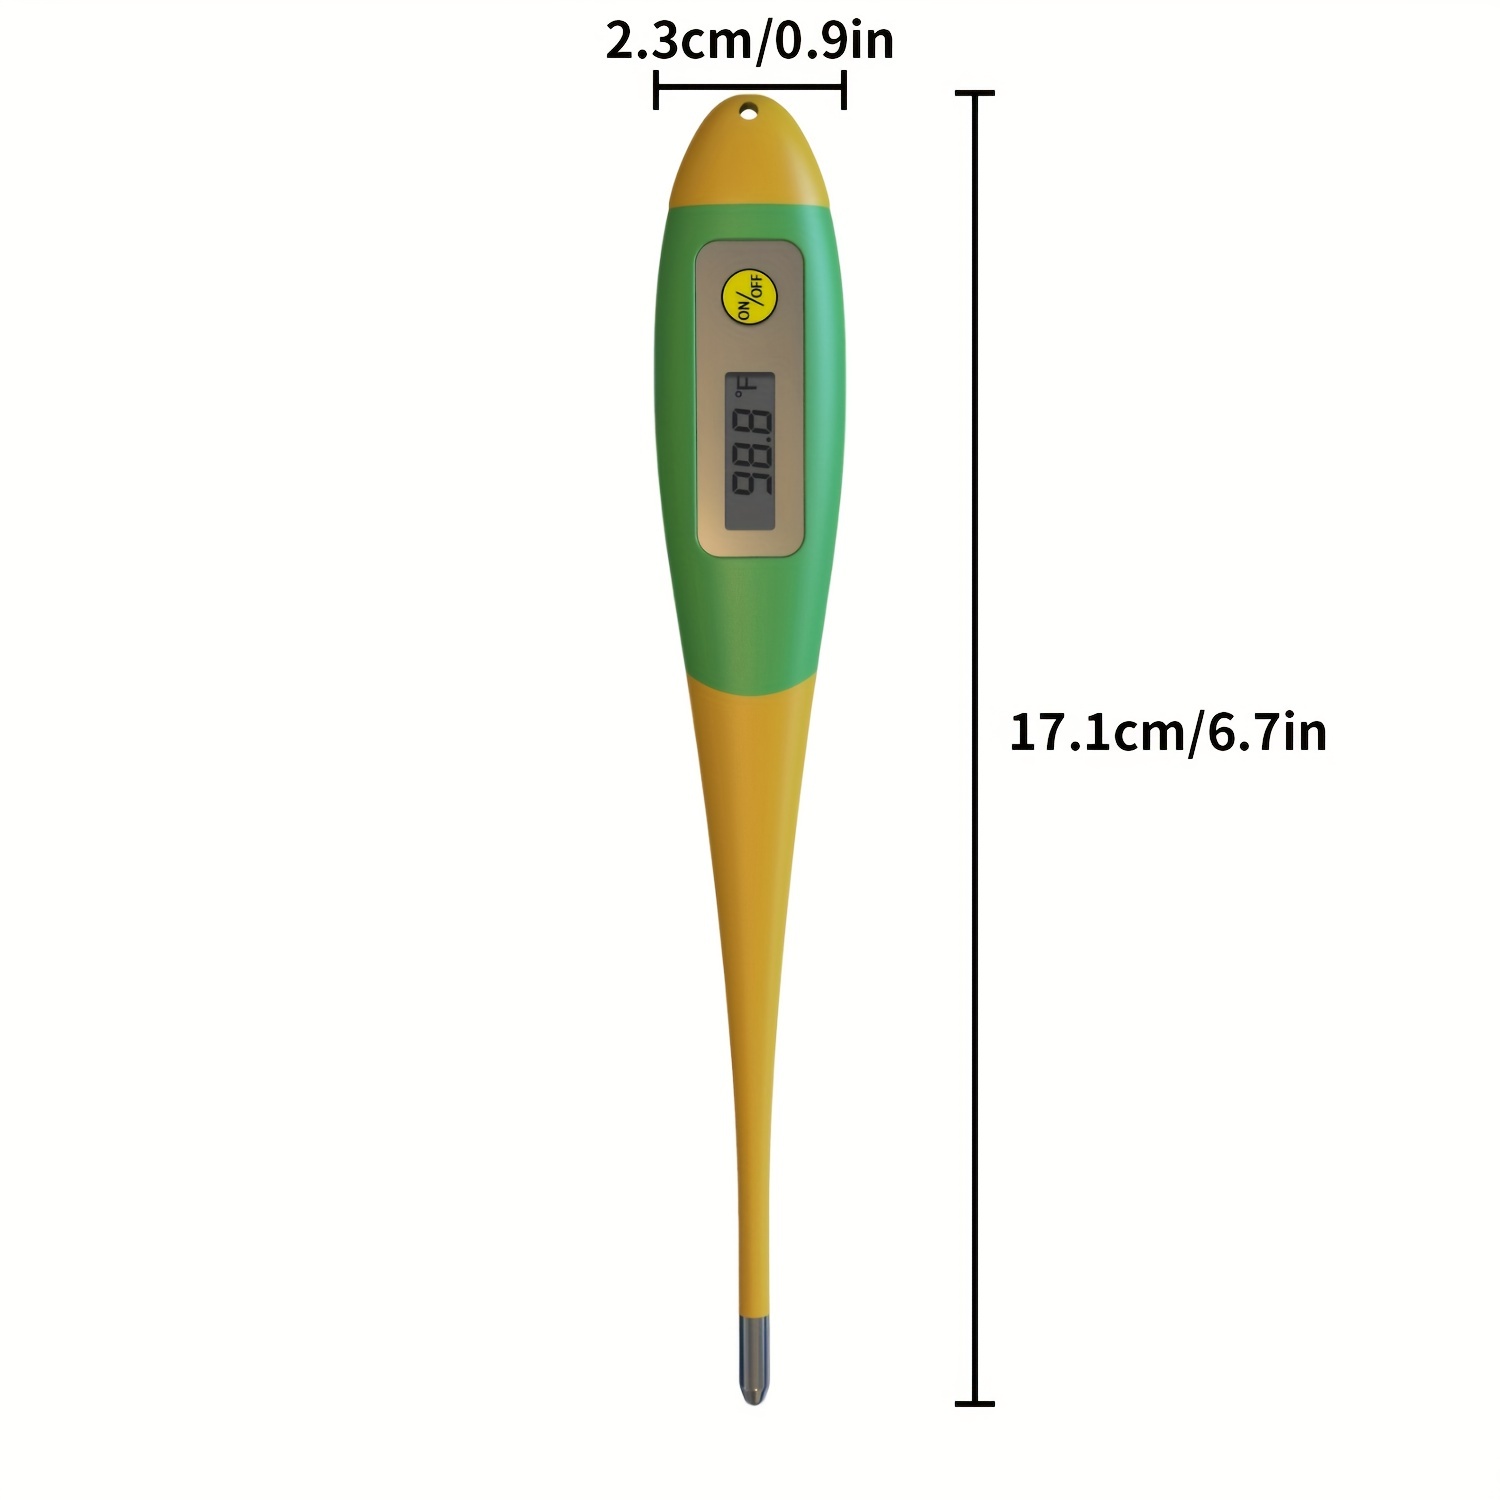 Pet Veterinary Thermometer, Pet Accurate Fever Detection